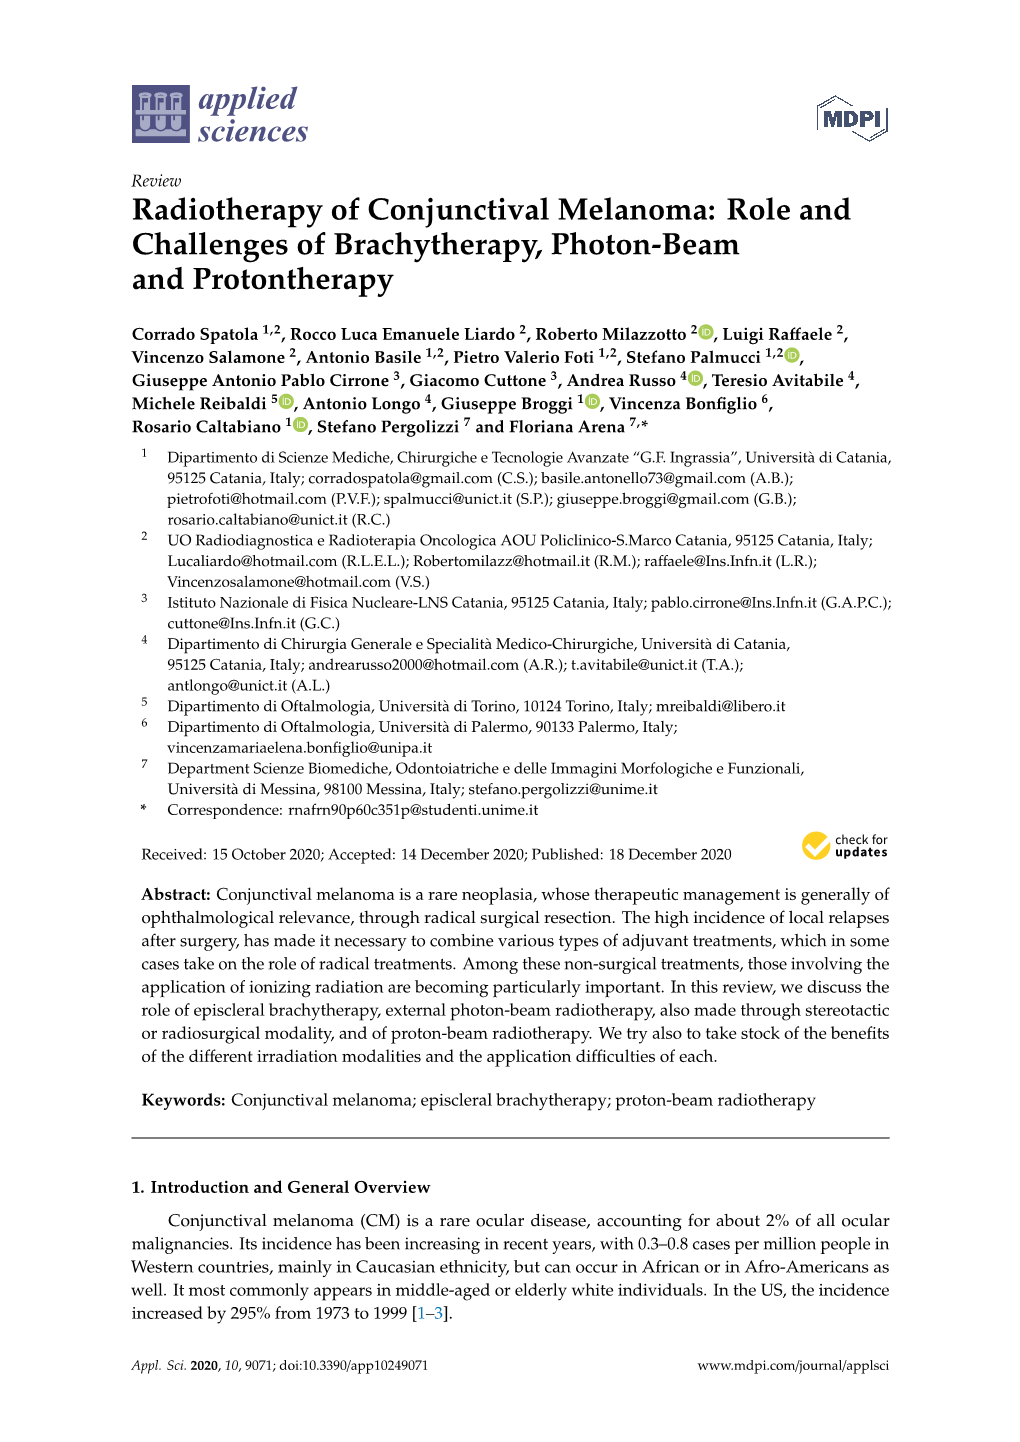 Radiotherapy of Conjunctival Melanoma: Role and Challenges of Brachytherapy, Photon-Beam and Protontherapy